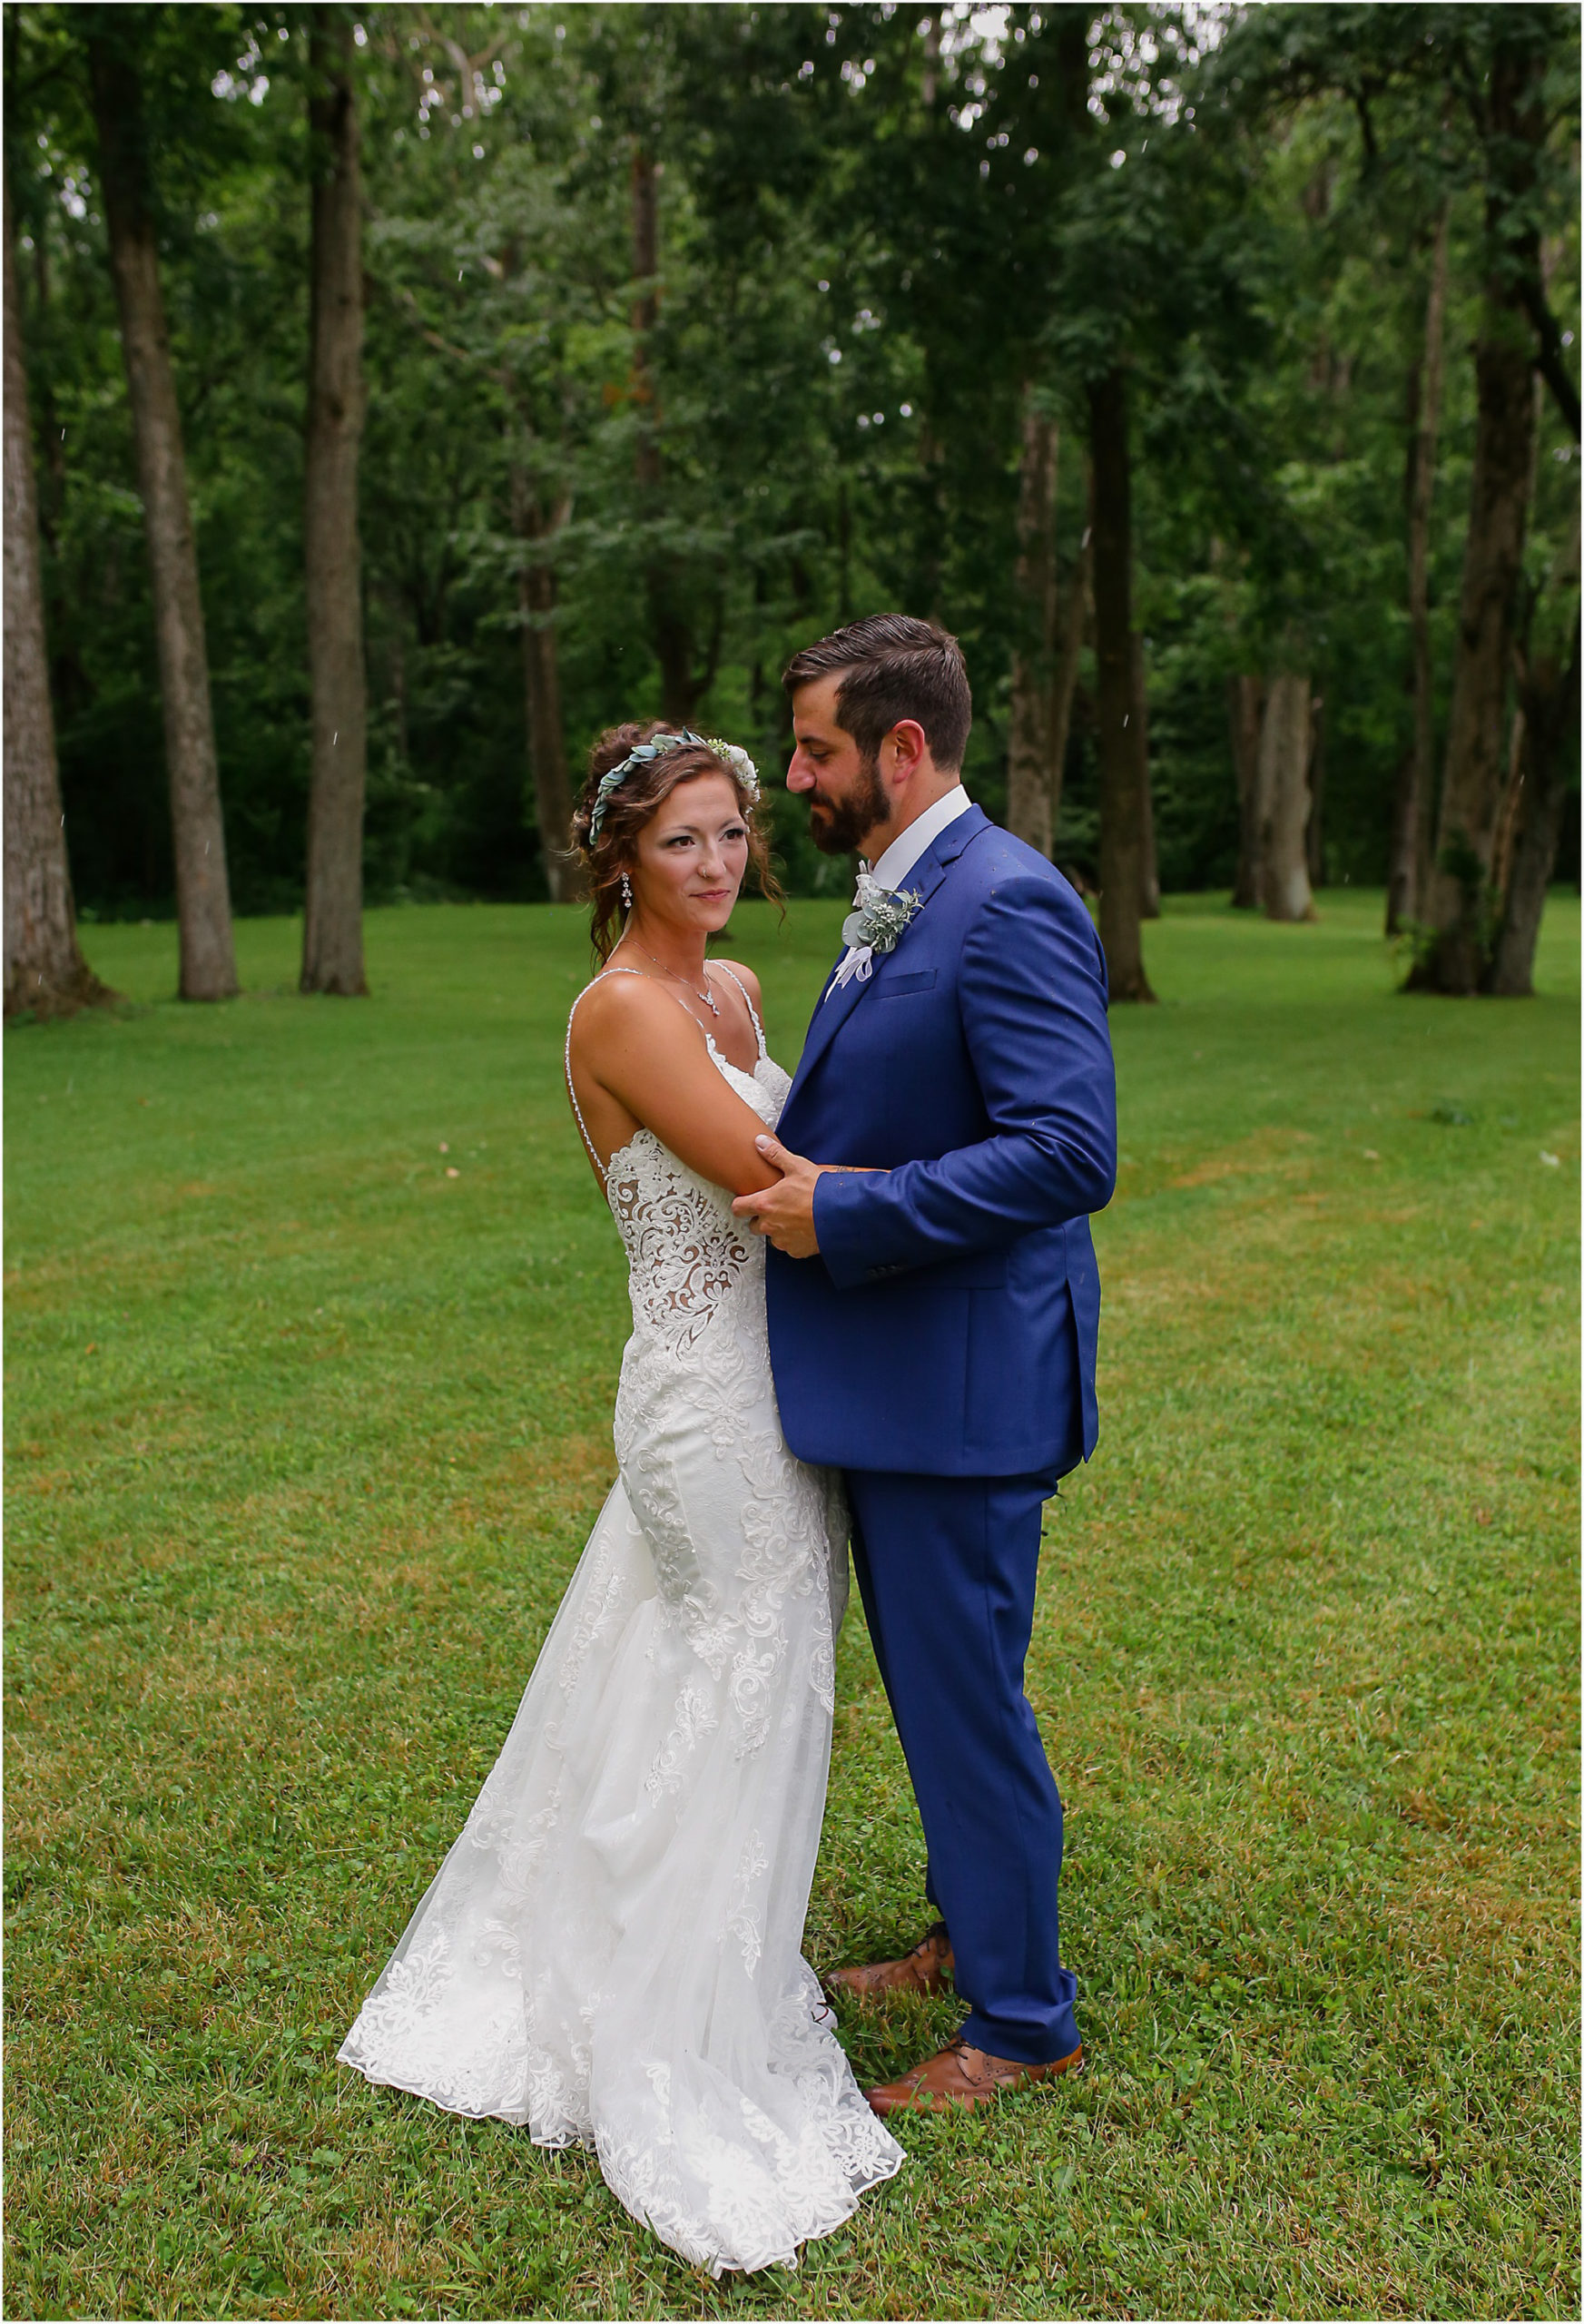 A gorgeous outdoor wedding {Collin + Haley} | Showit Blog